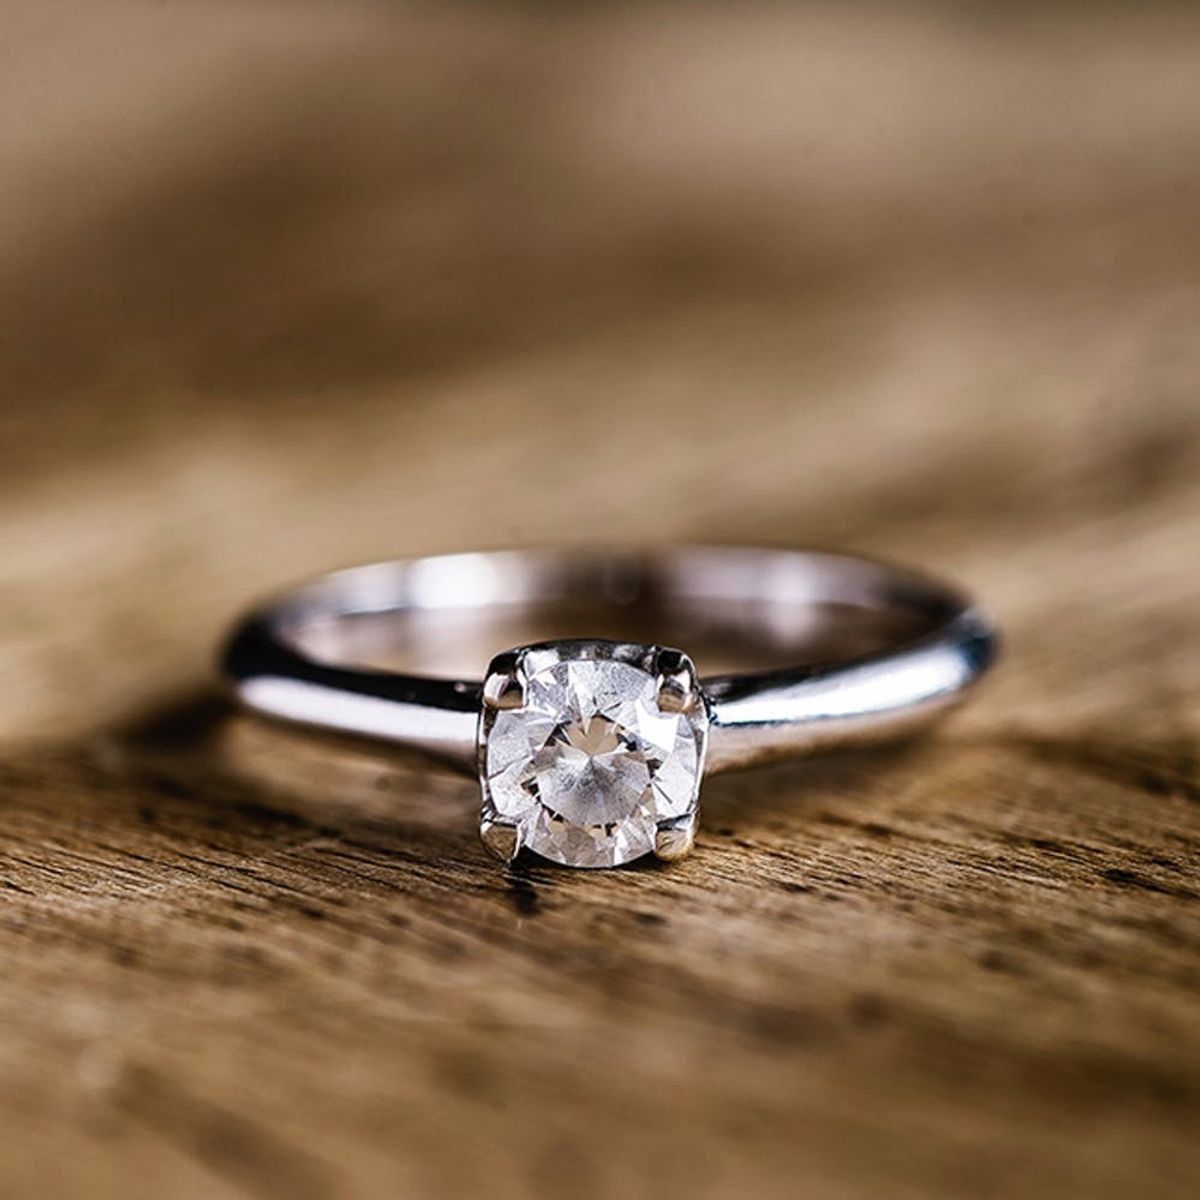 The Biggest Disadvantage of Buying an Engagement Ring Online